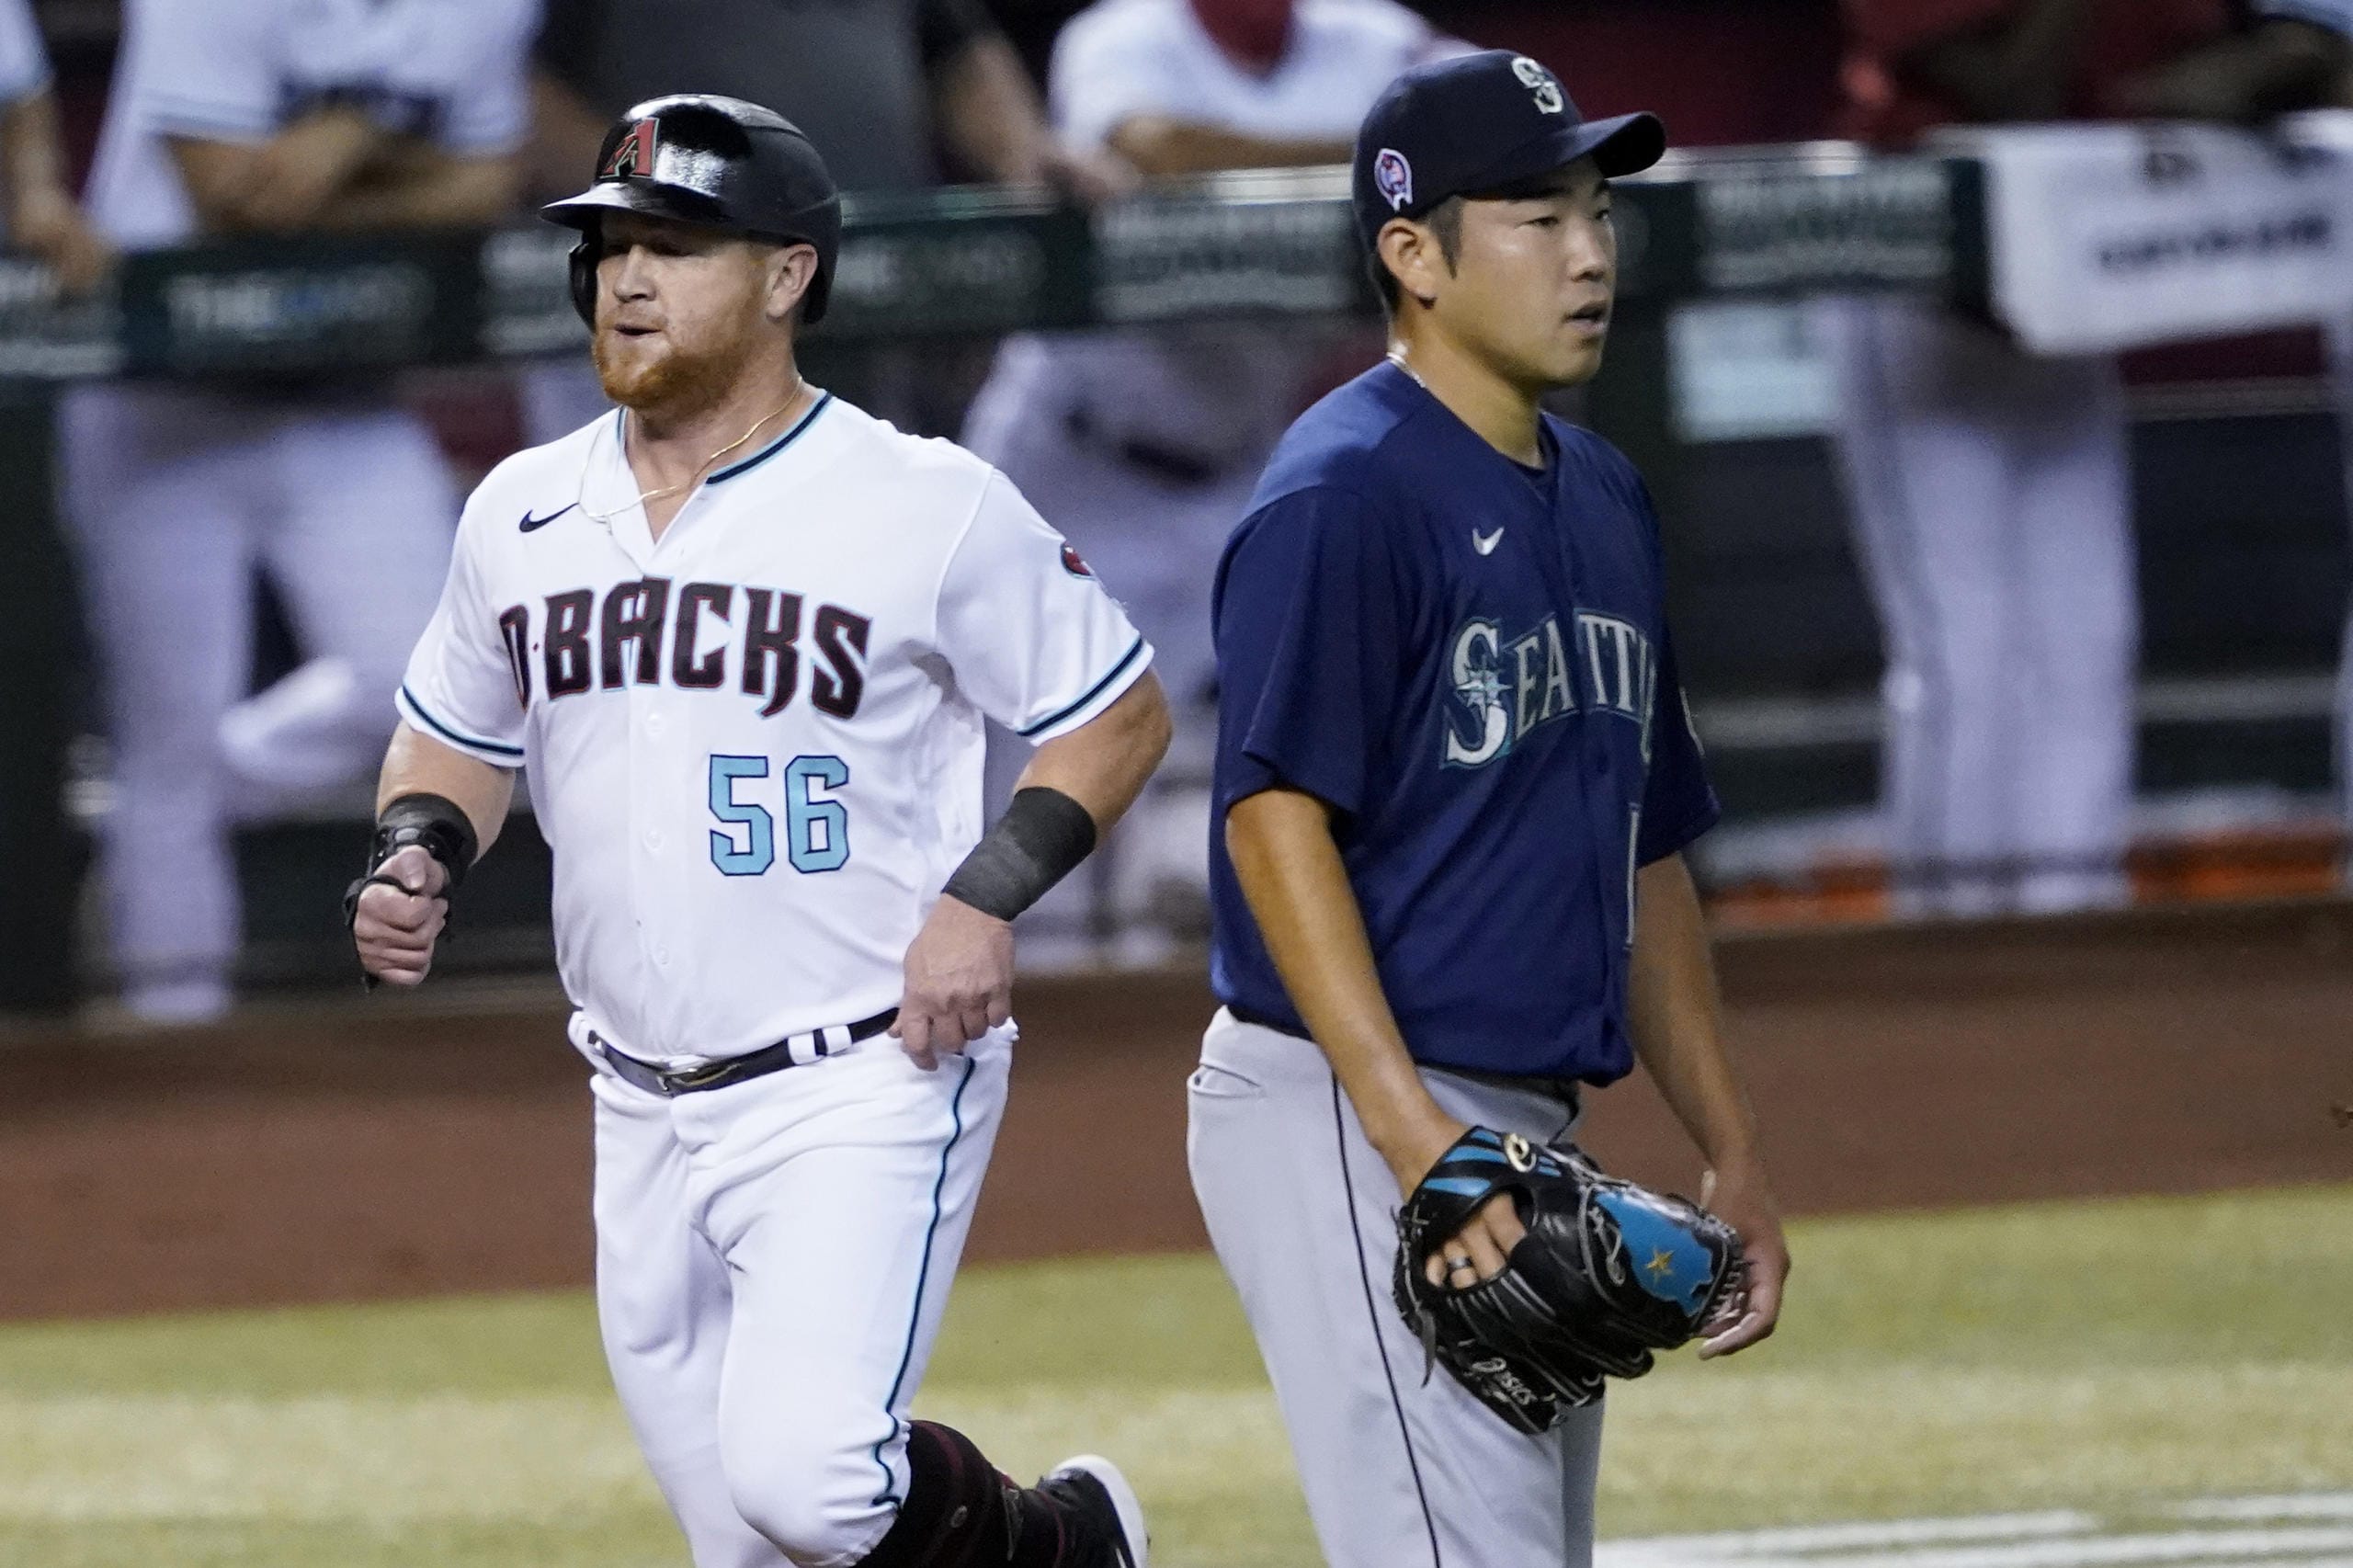 Mariners can't catch up to D'backs, lose 4-3 - The Columbian